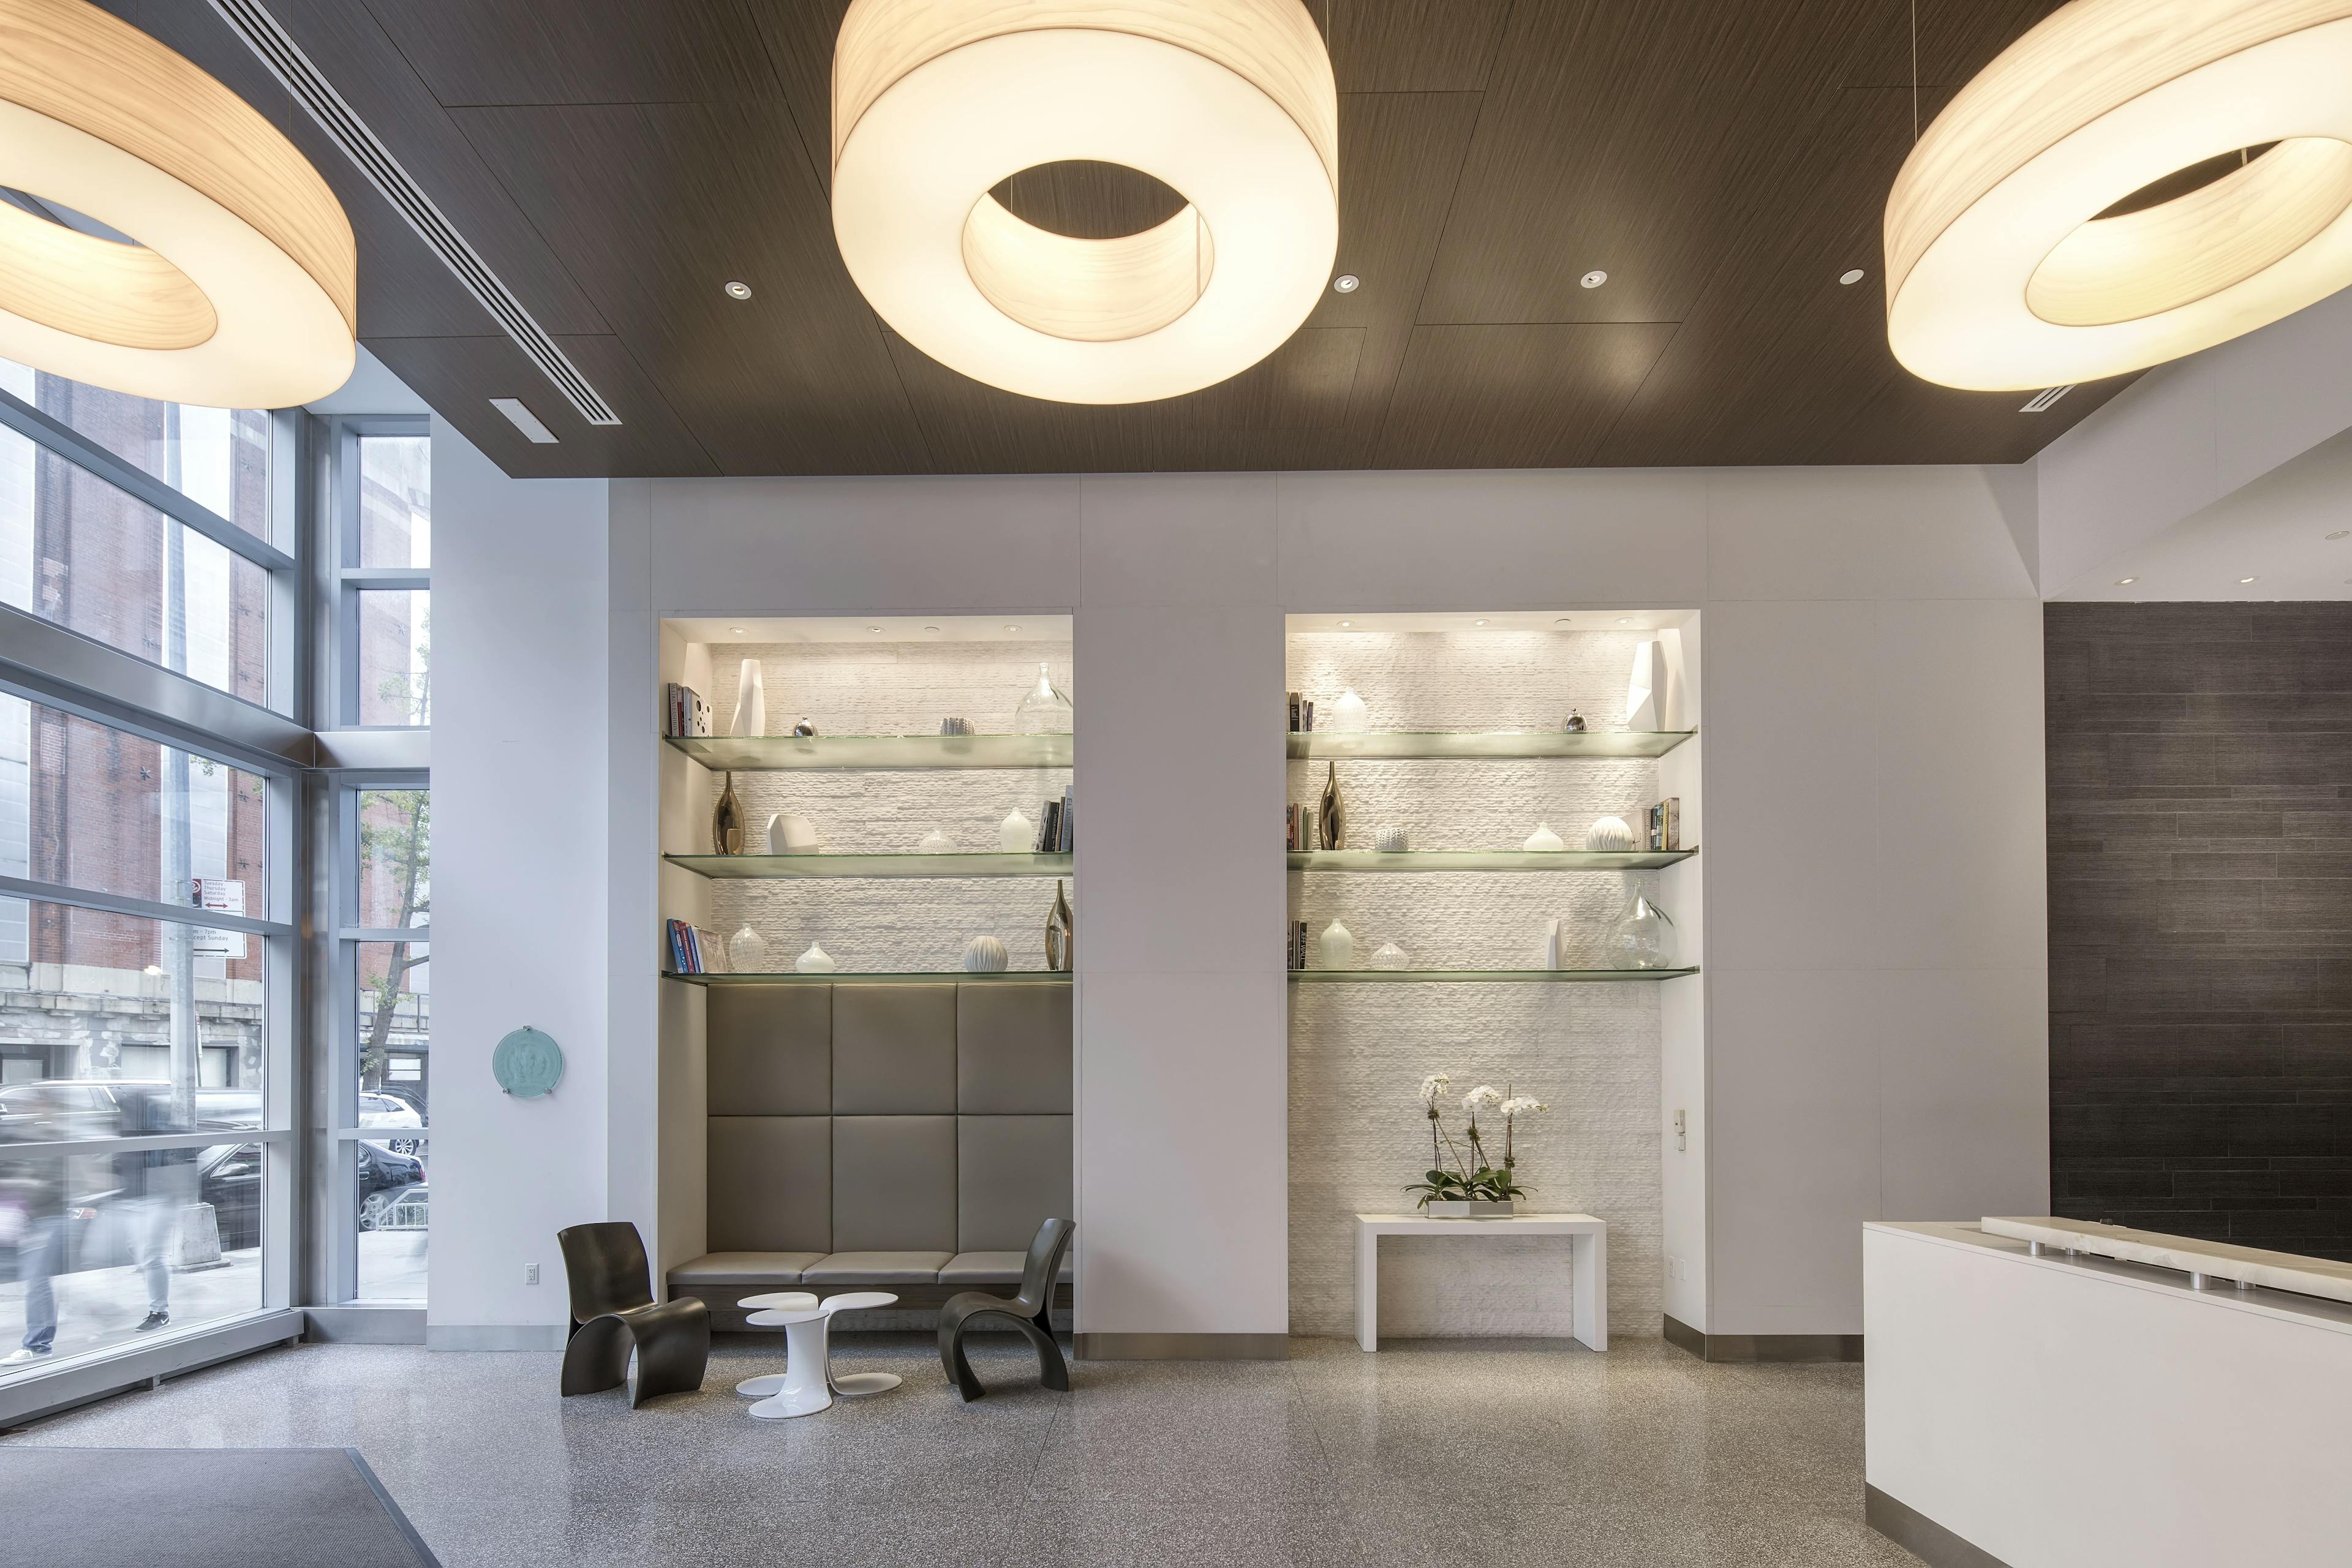 Modern lounge area at DKLB BKLN with three circular lighting fixtures, gray floors, and exposed glass shelves with an assortment of white vessels.